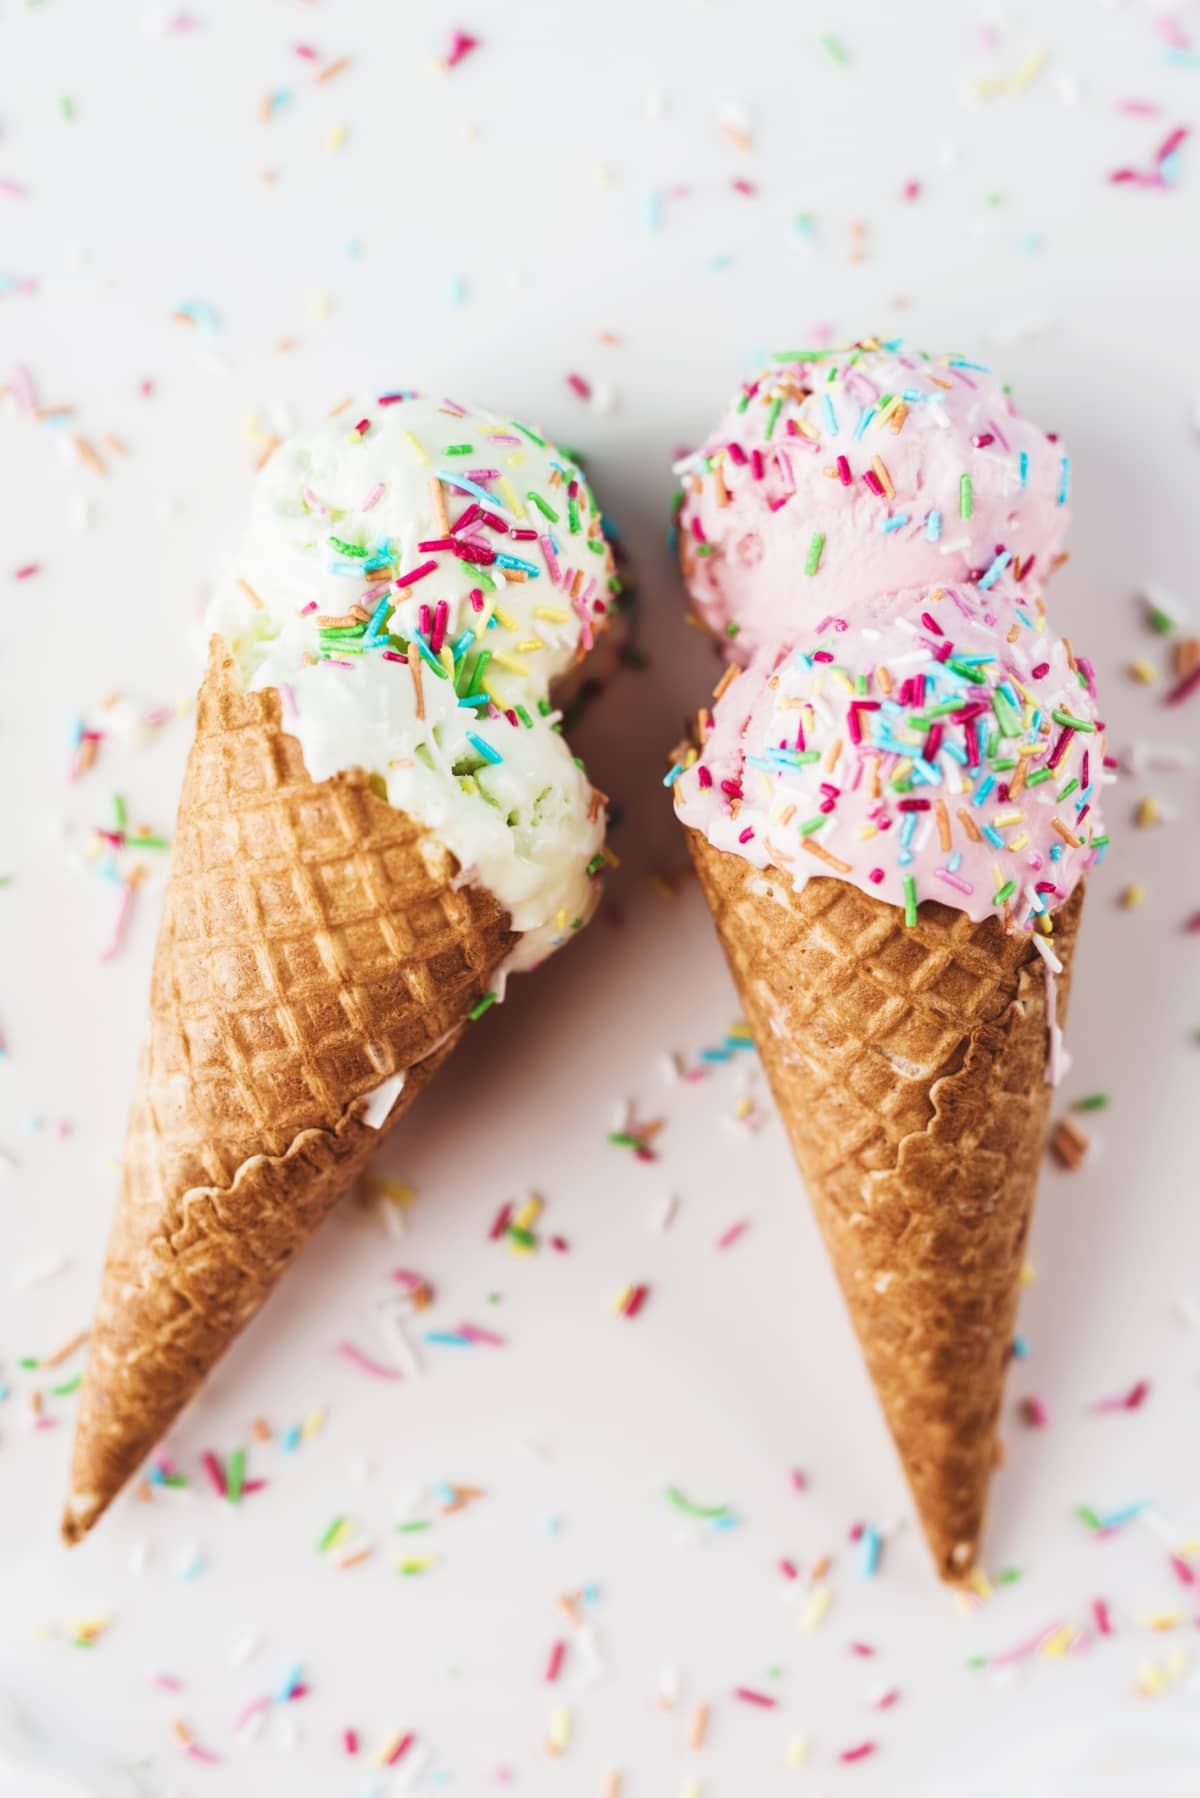 What Was The World's First Ice Cream Flavor?